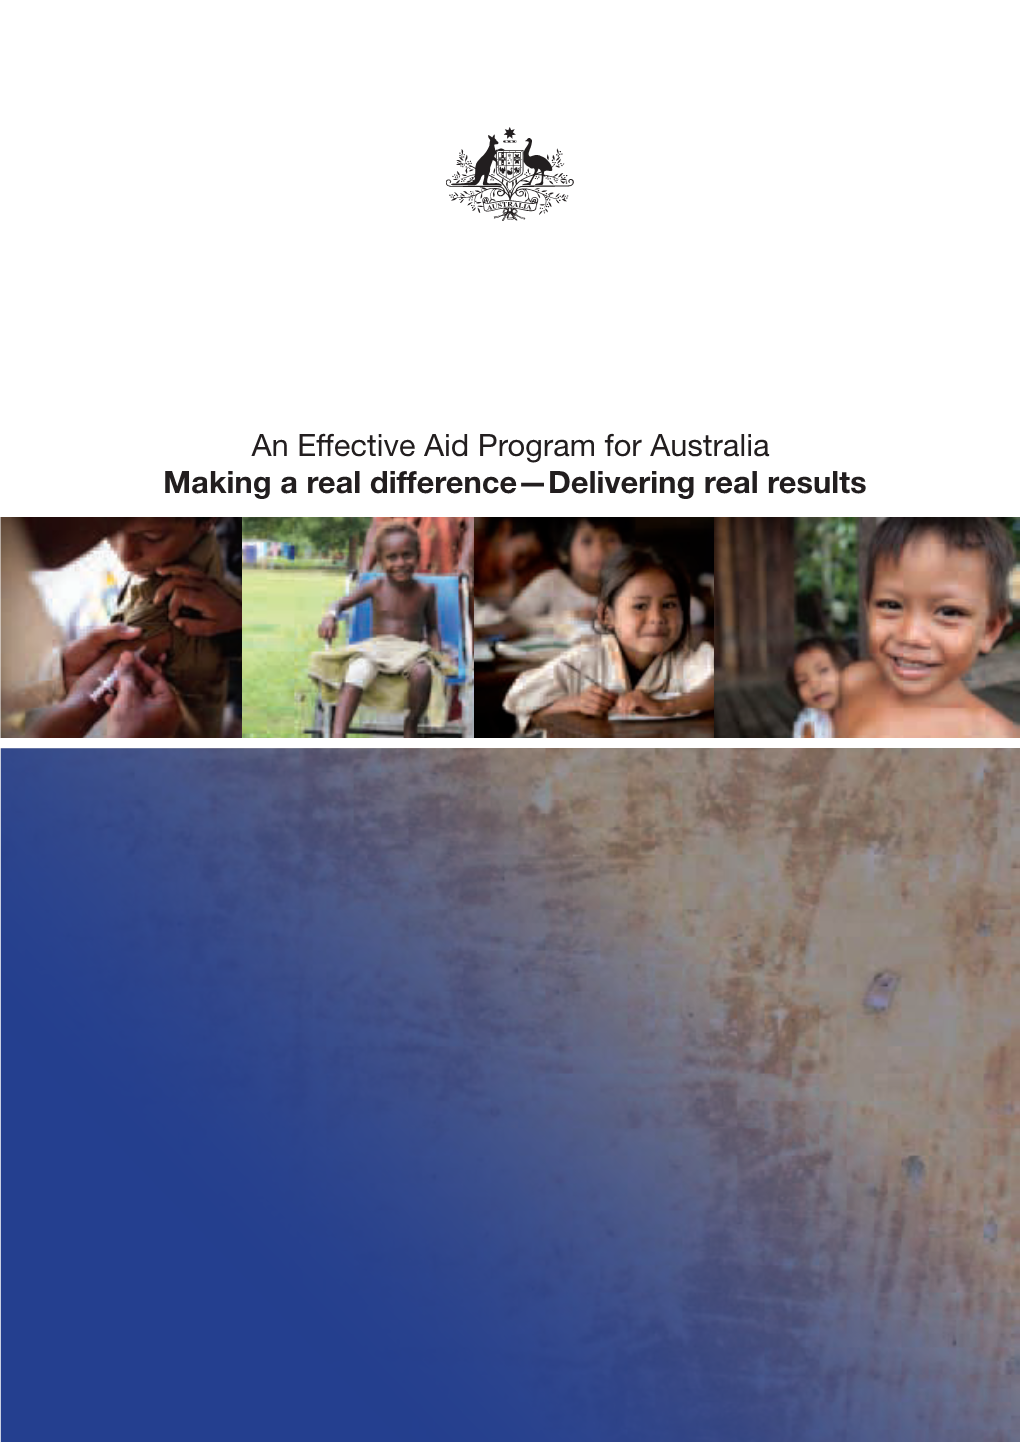 An Effective Aid Program for Australia. Making a Real Difference